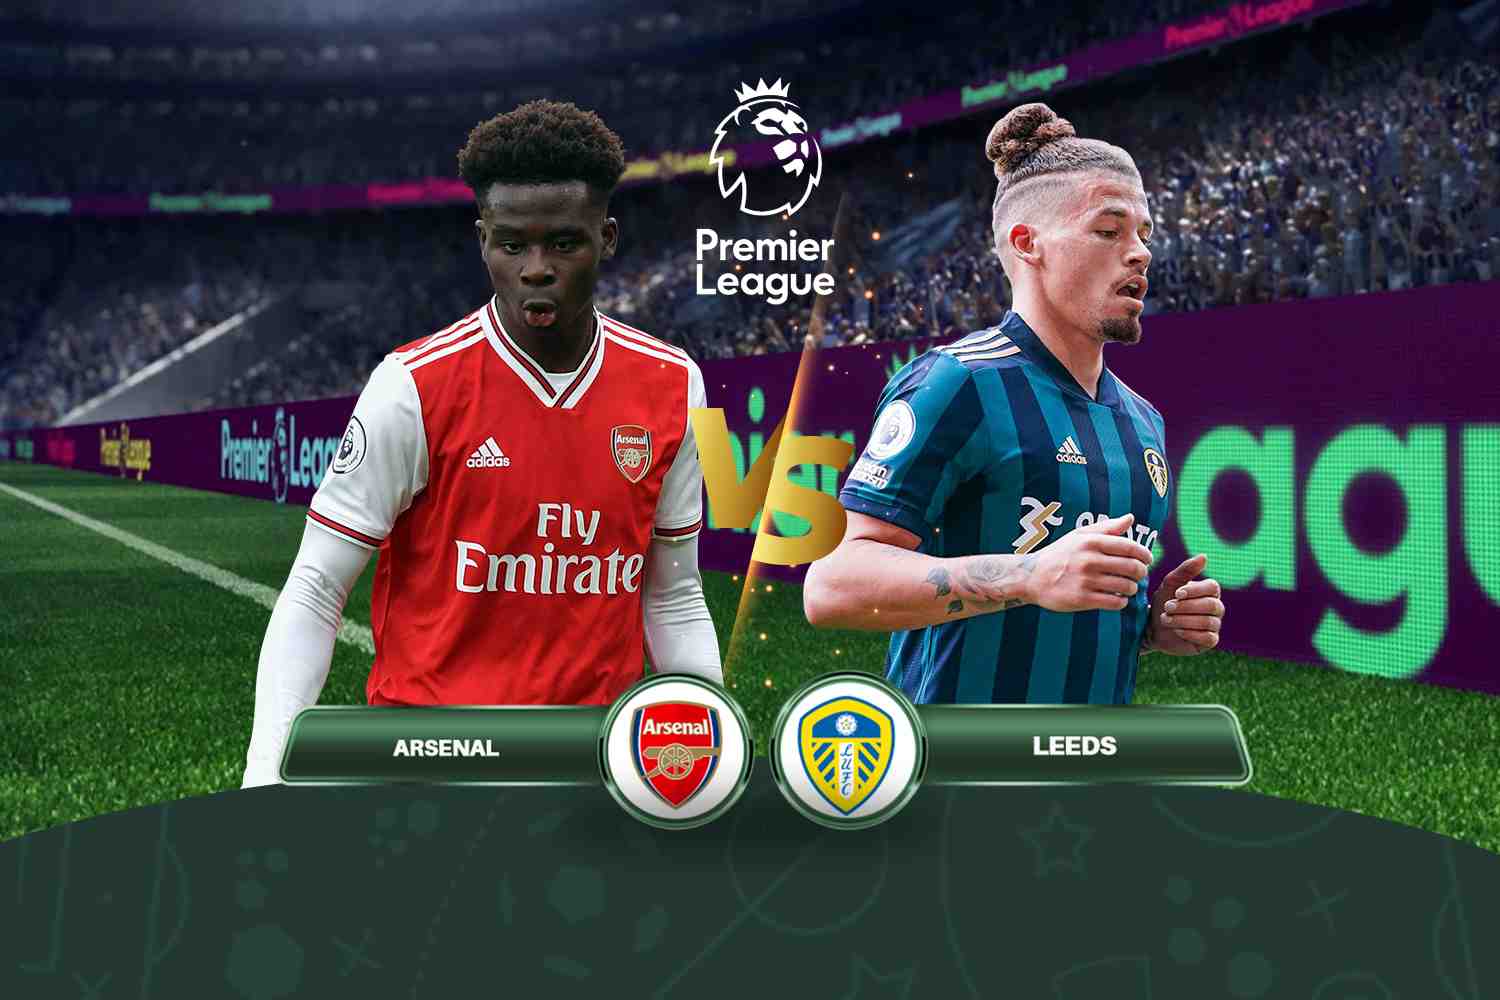 Arsenal vs Leeds match preview & betting prediction